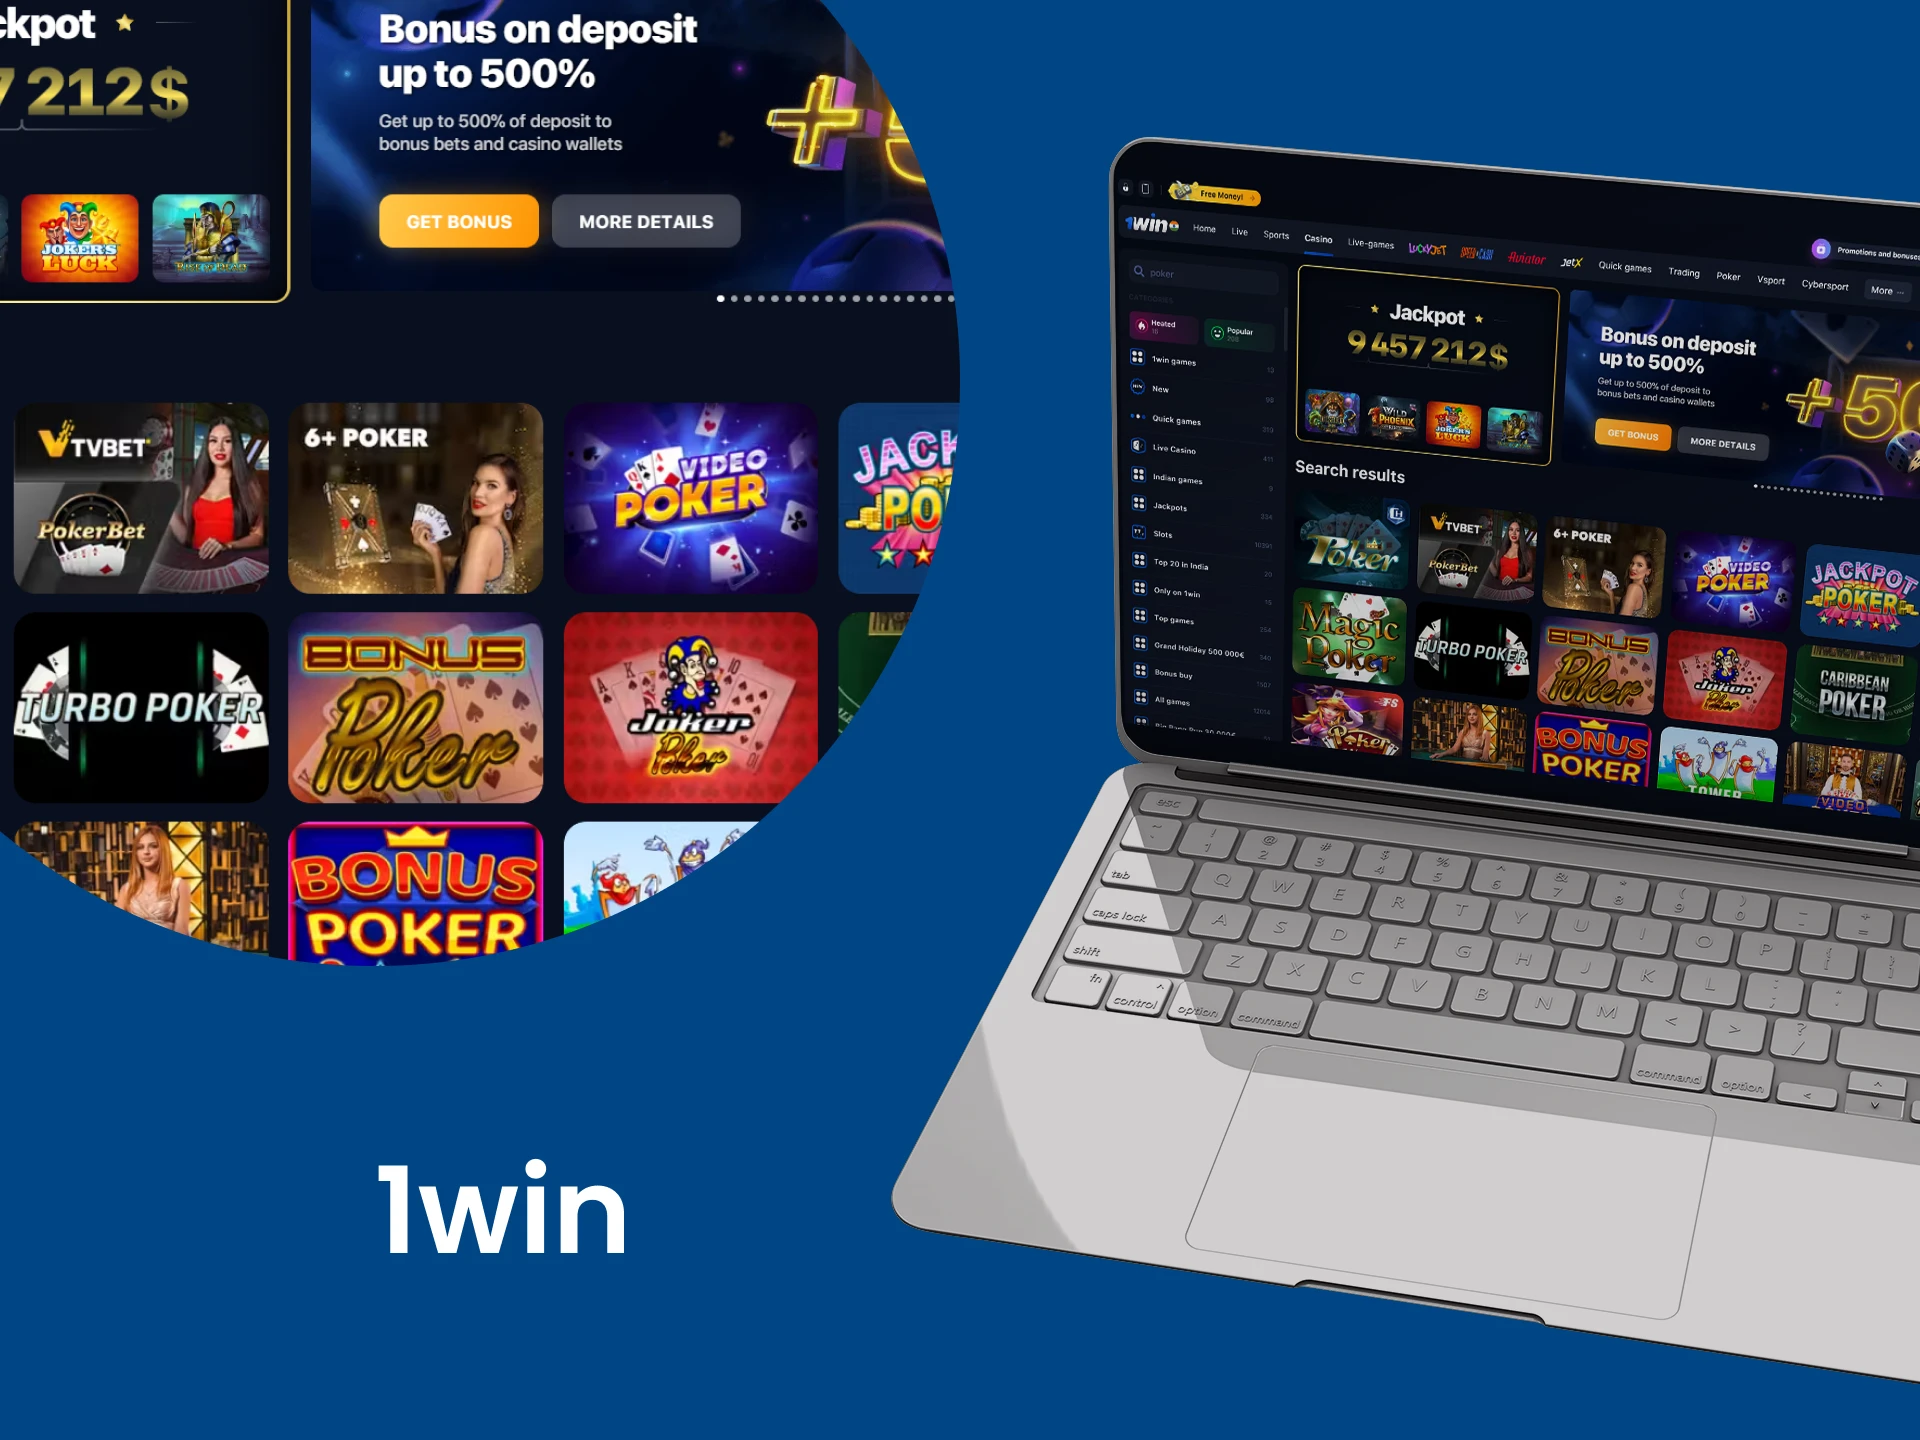 Choose the 1win site to play Video Poker.